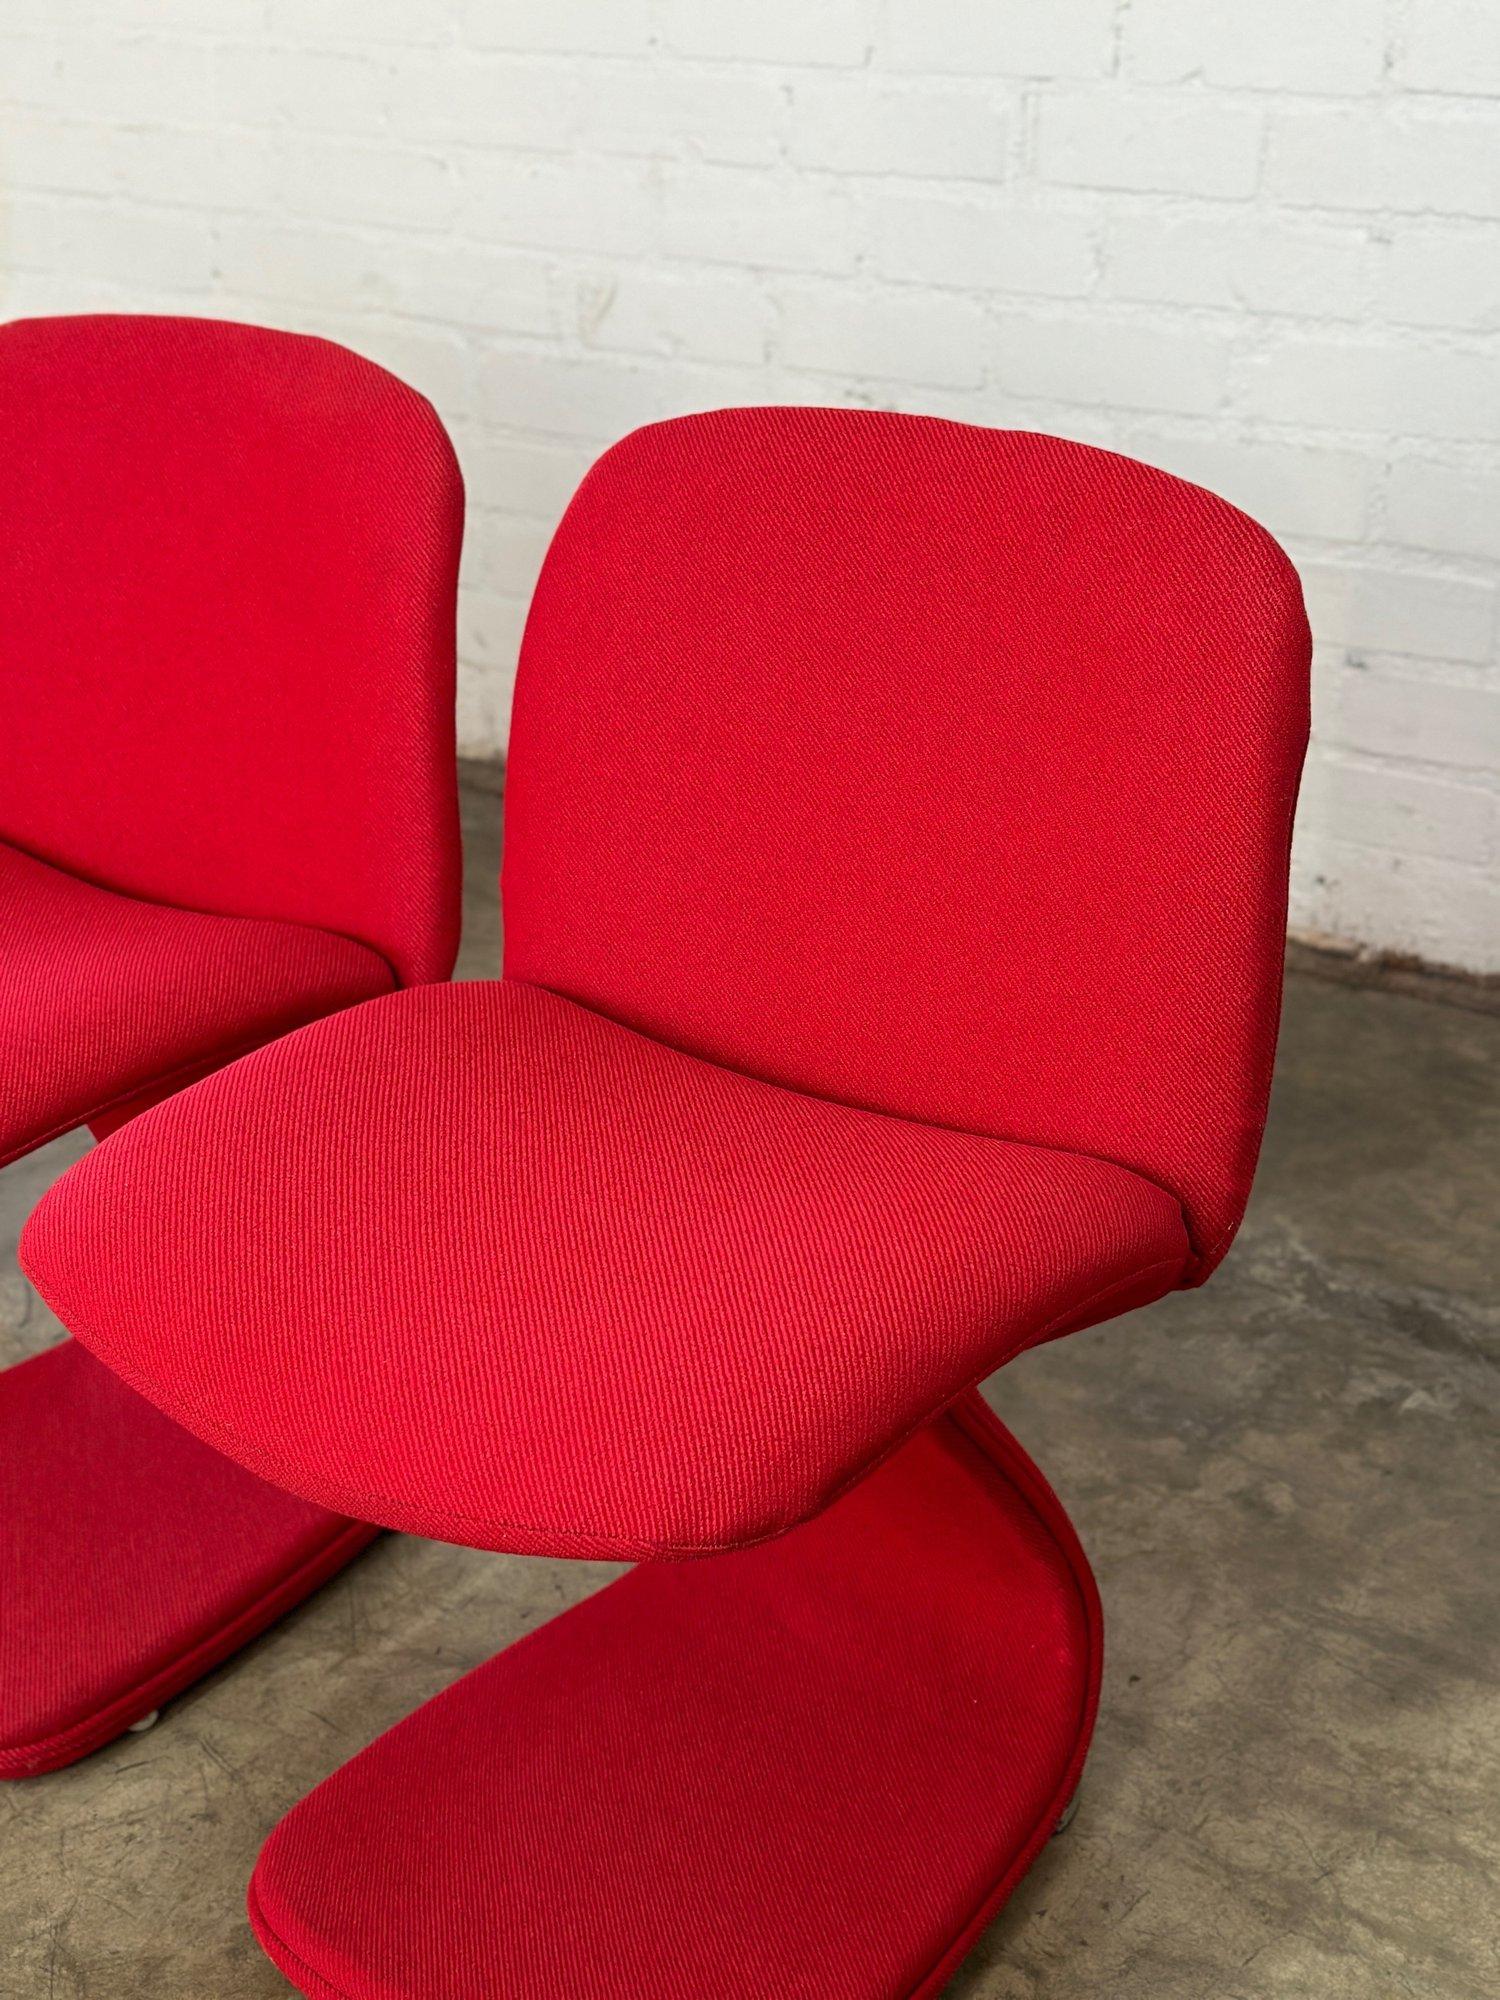 Late 20th Century Italian Cantilevered Chairs by Joe Colombo - set of four For Sale